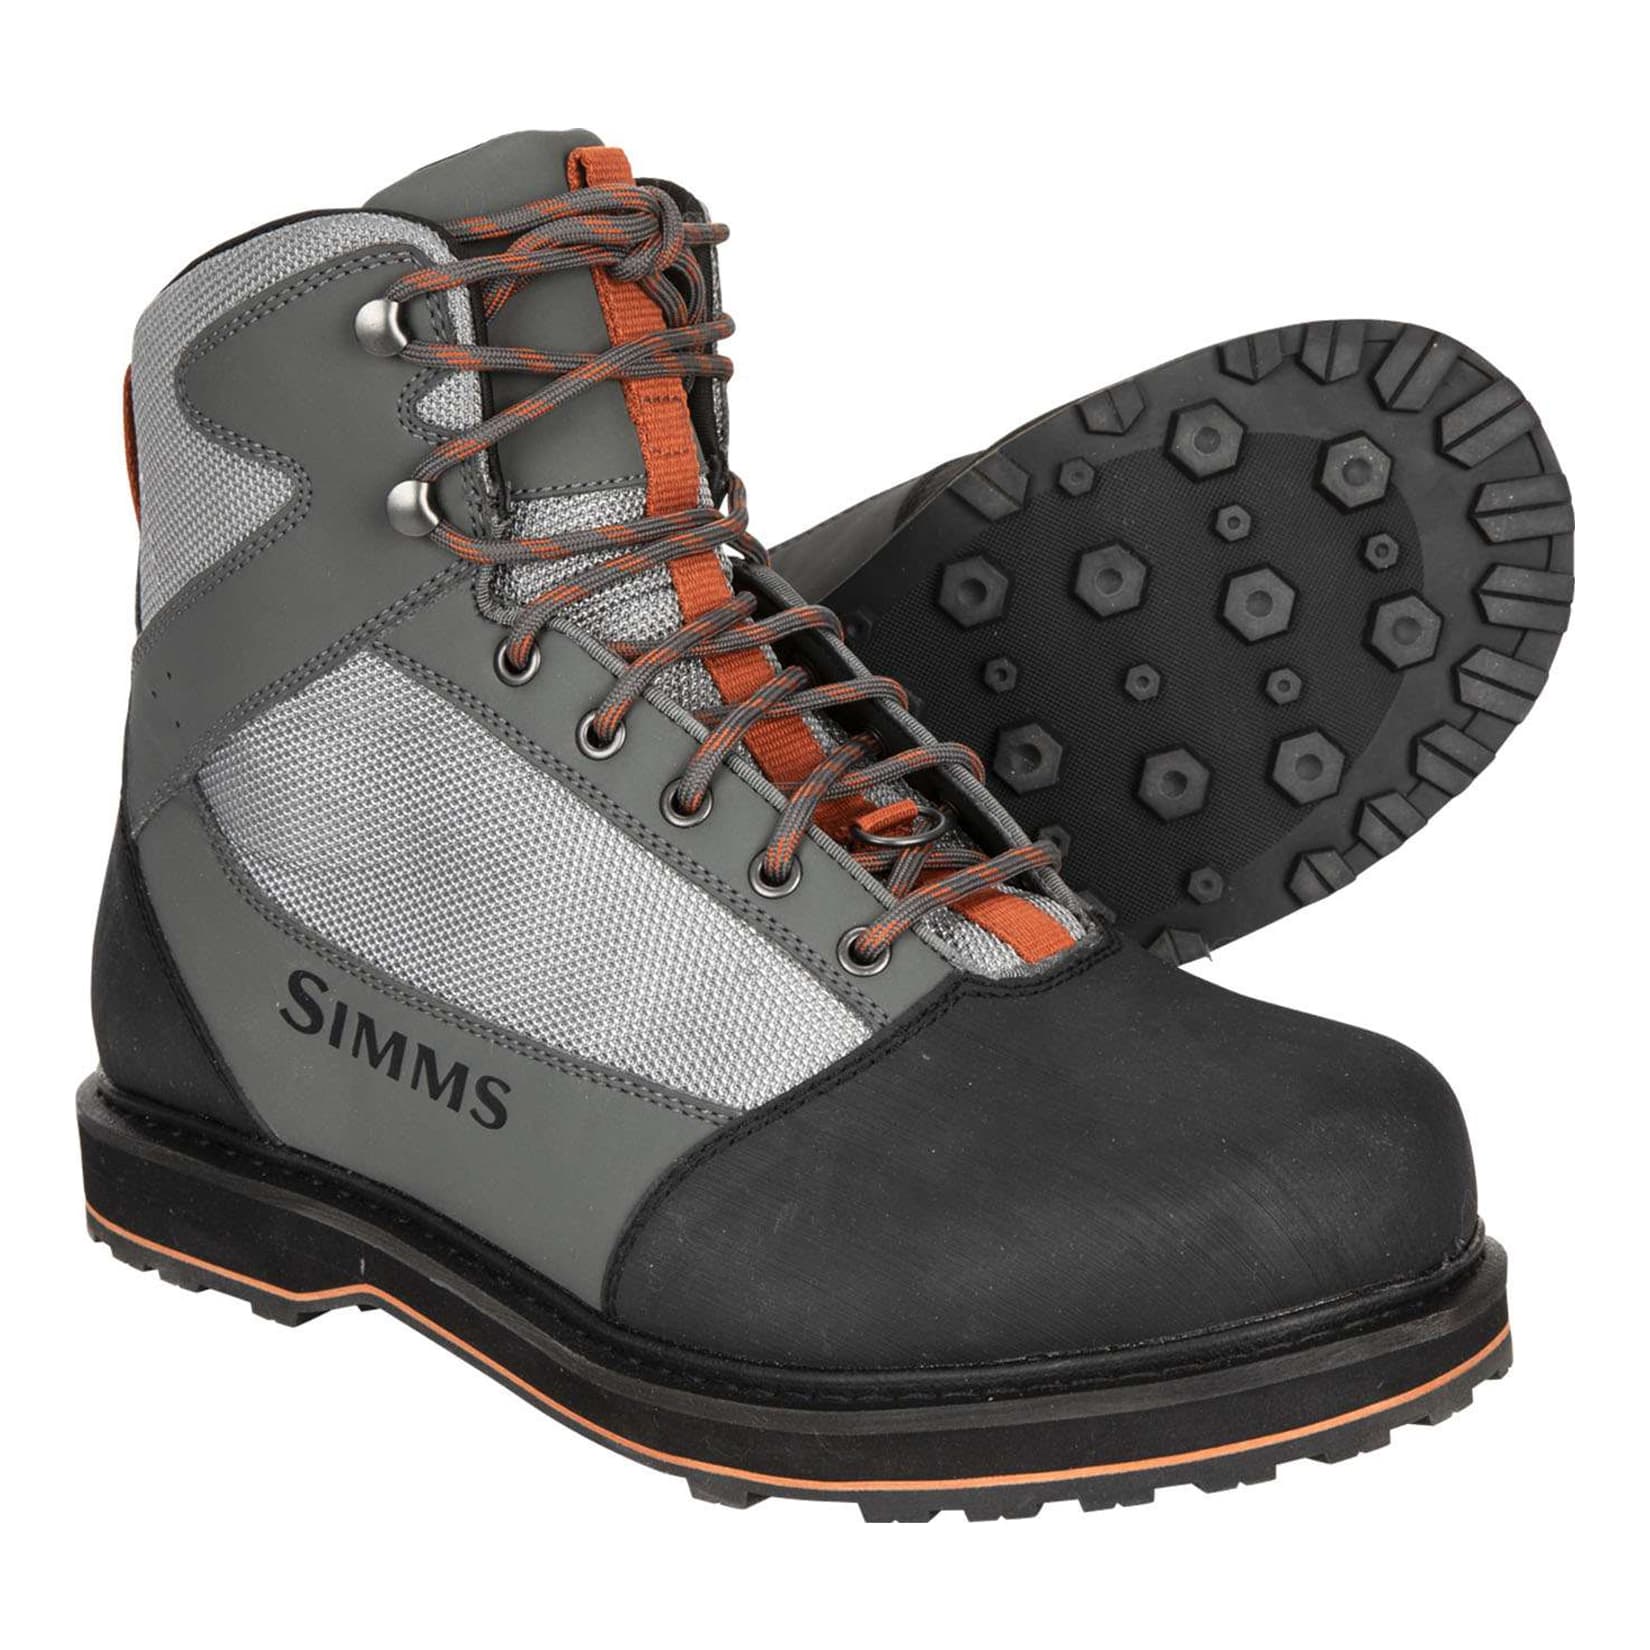 Simms® Men’s Tributary Wading Boot